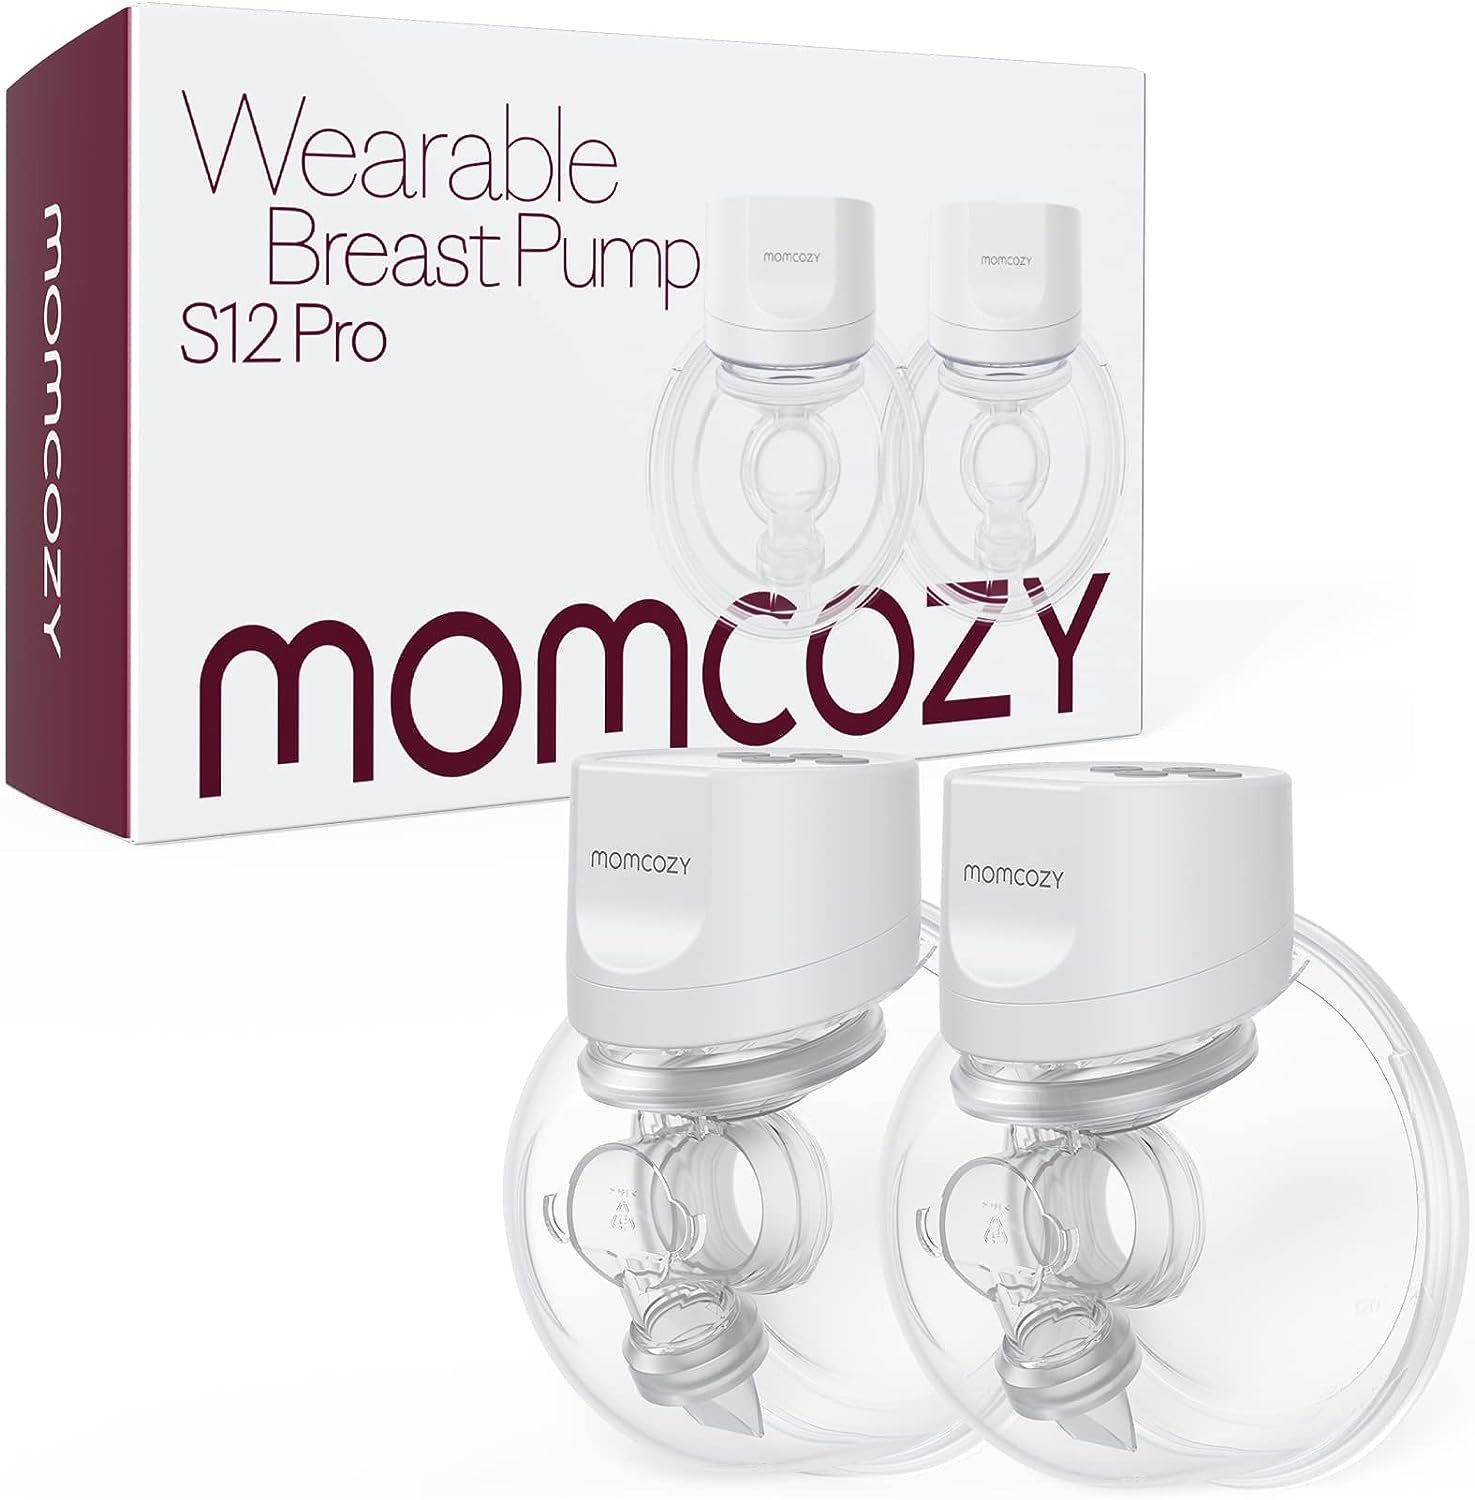 Sale Now On! Momcozy Wearable Breast Pump S12 Pro - Hurry! Limited-Time Discount of 34% Off